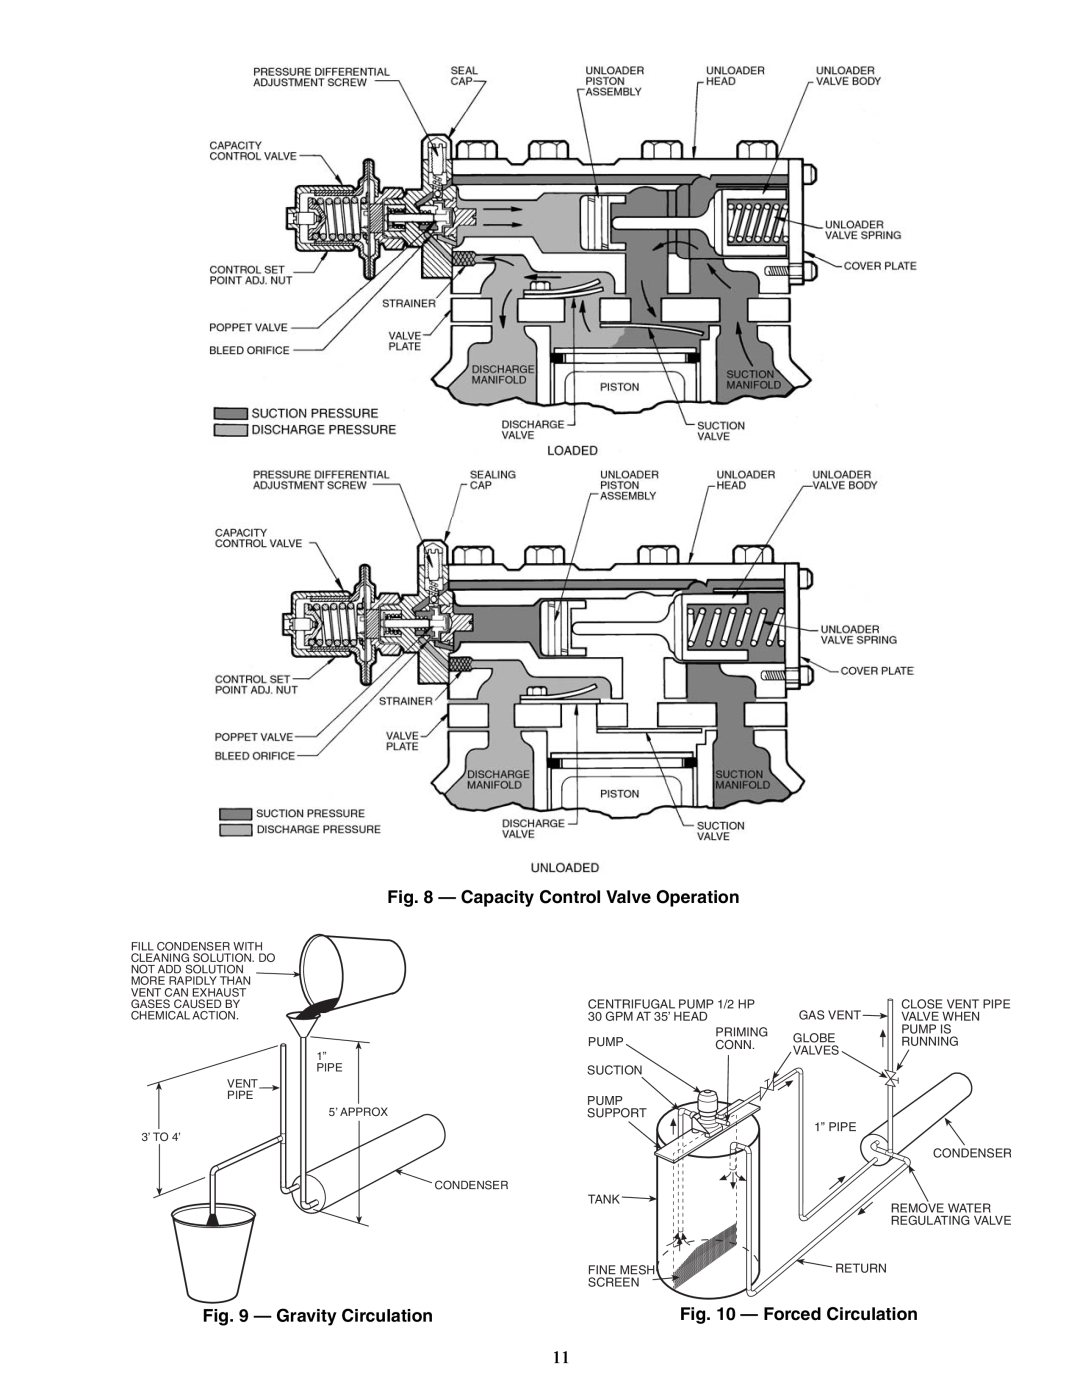 Carrier 06D Capacity Control Valve Operation, Gravity Circulation, Compressor - Forced Circulation, Bottom Plate Removed 